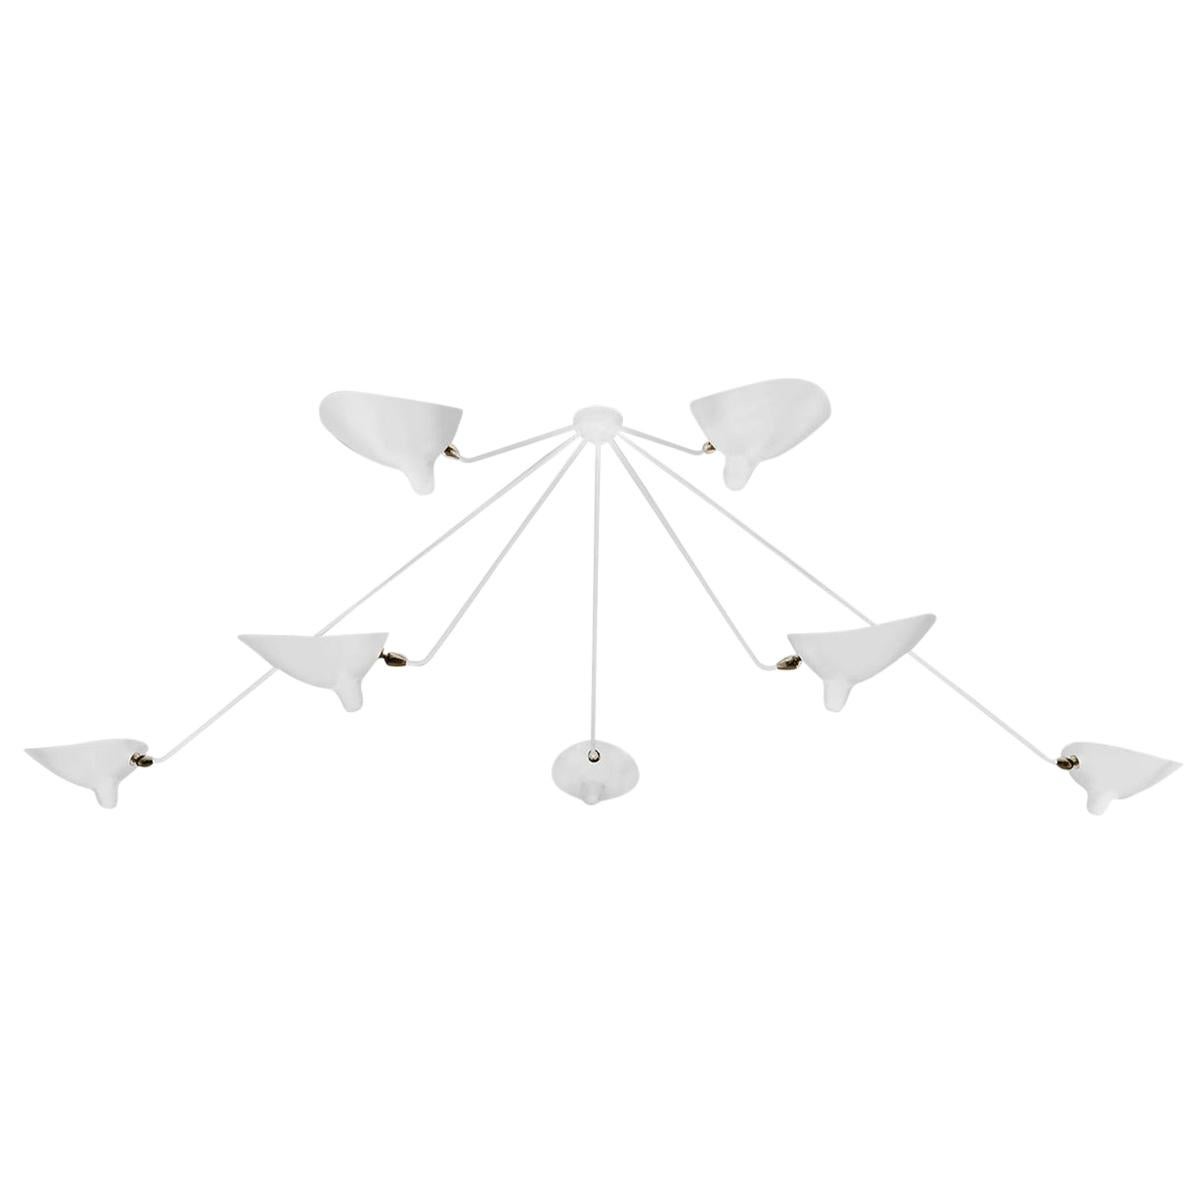 Serge Mouille Mid-Century Modern White Seven Fixed Arms Spider Ceiling Lamp im Angebot